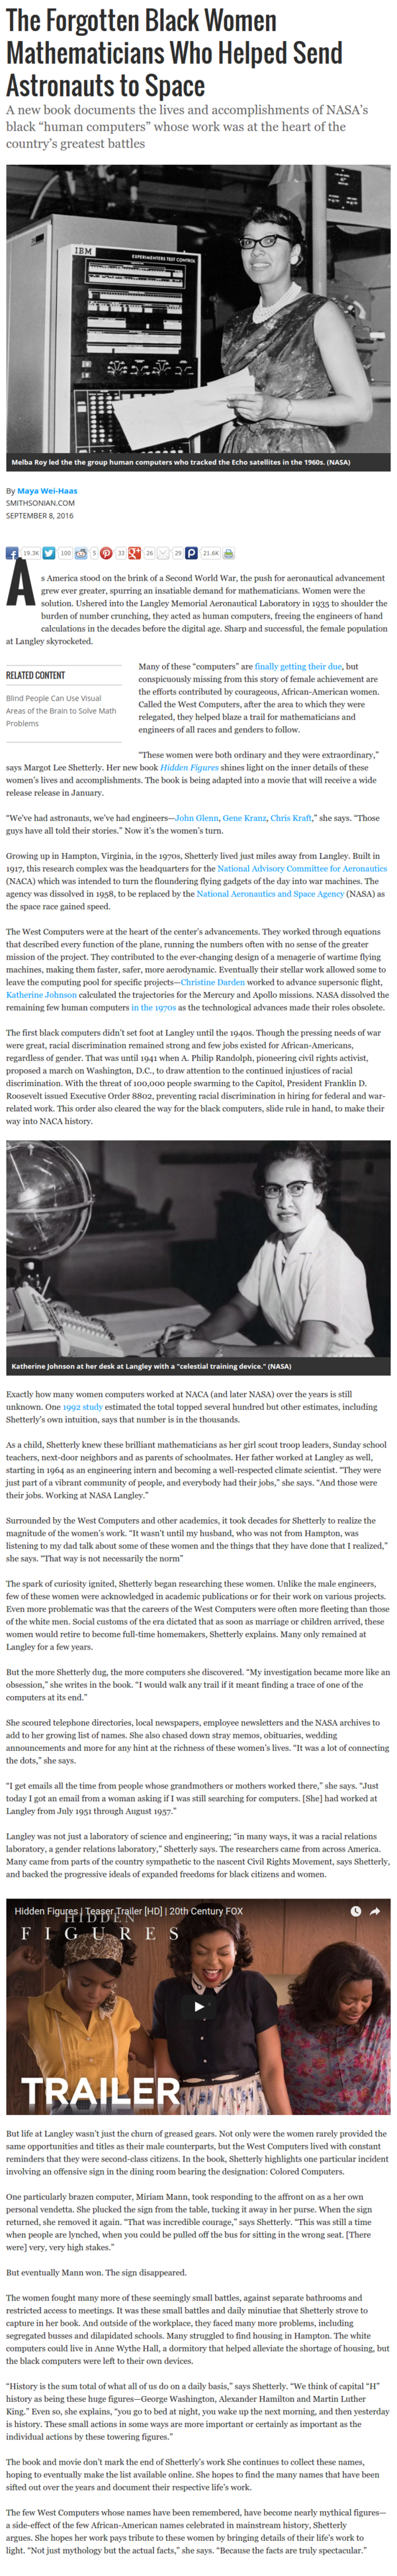 ./20161214-1305-cet-black-woman-mathematician-helped-nasa-to-space-1.png